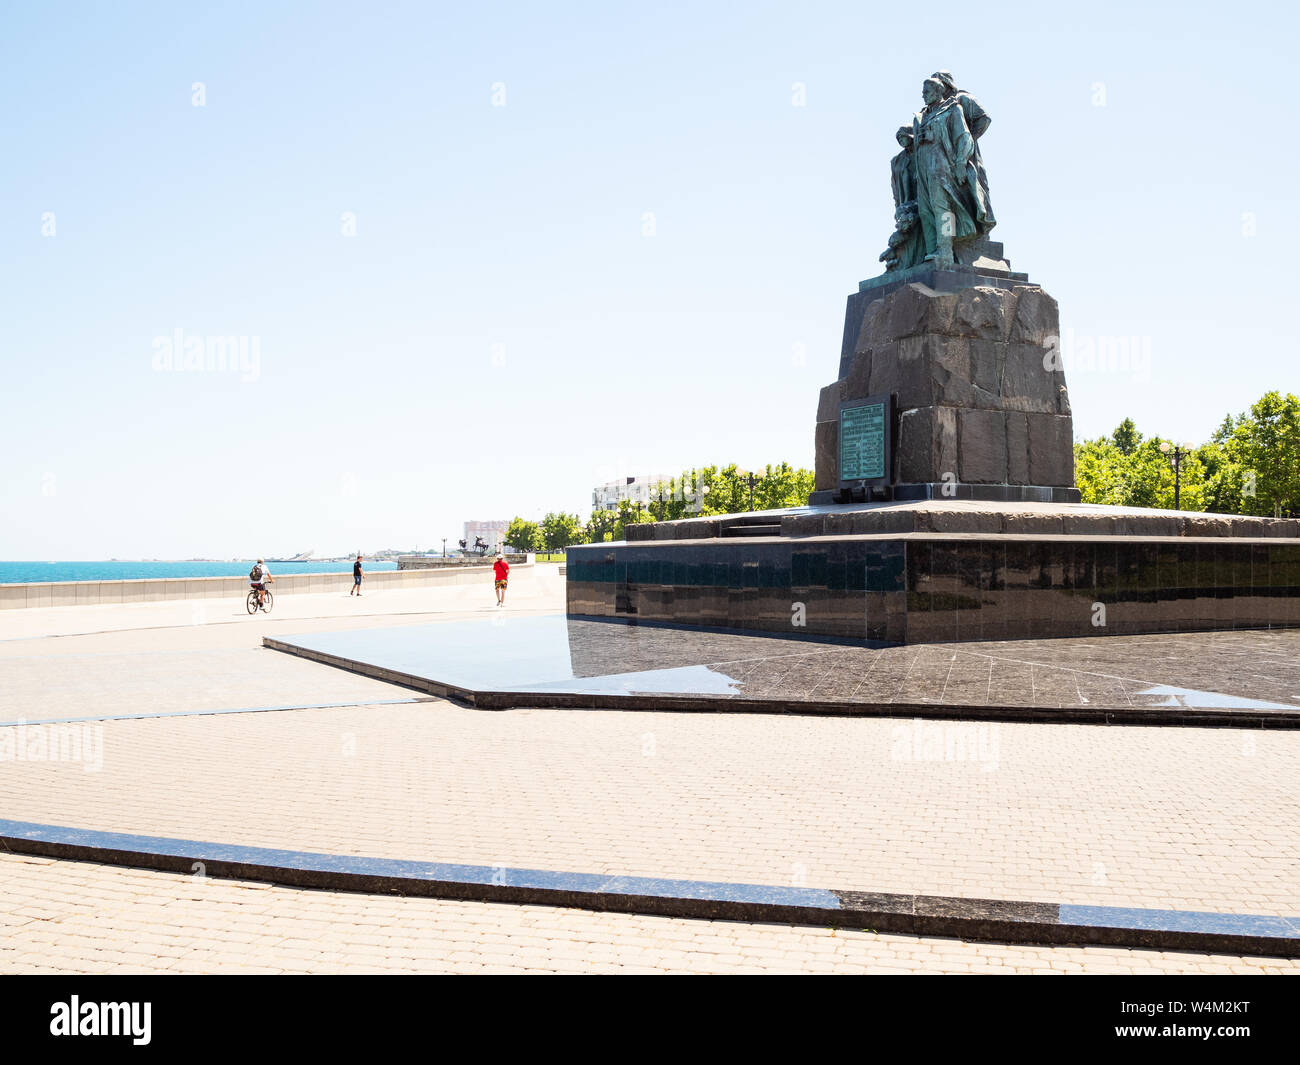 NOVOROSSIYSK, RUSSIA - JULY 7, 2019: people walk on Admiral Serebryakov Embankment and Monument to the Dead Fishermen of Seiner Urup on Cape of Love i Stock Photo